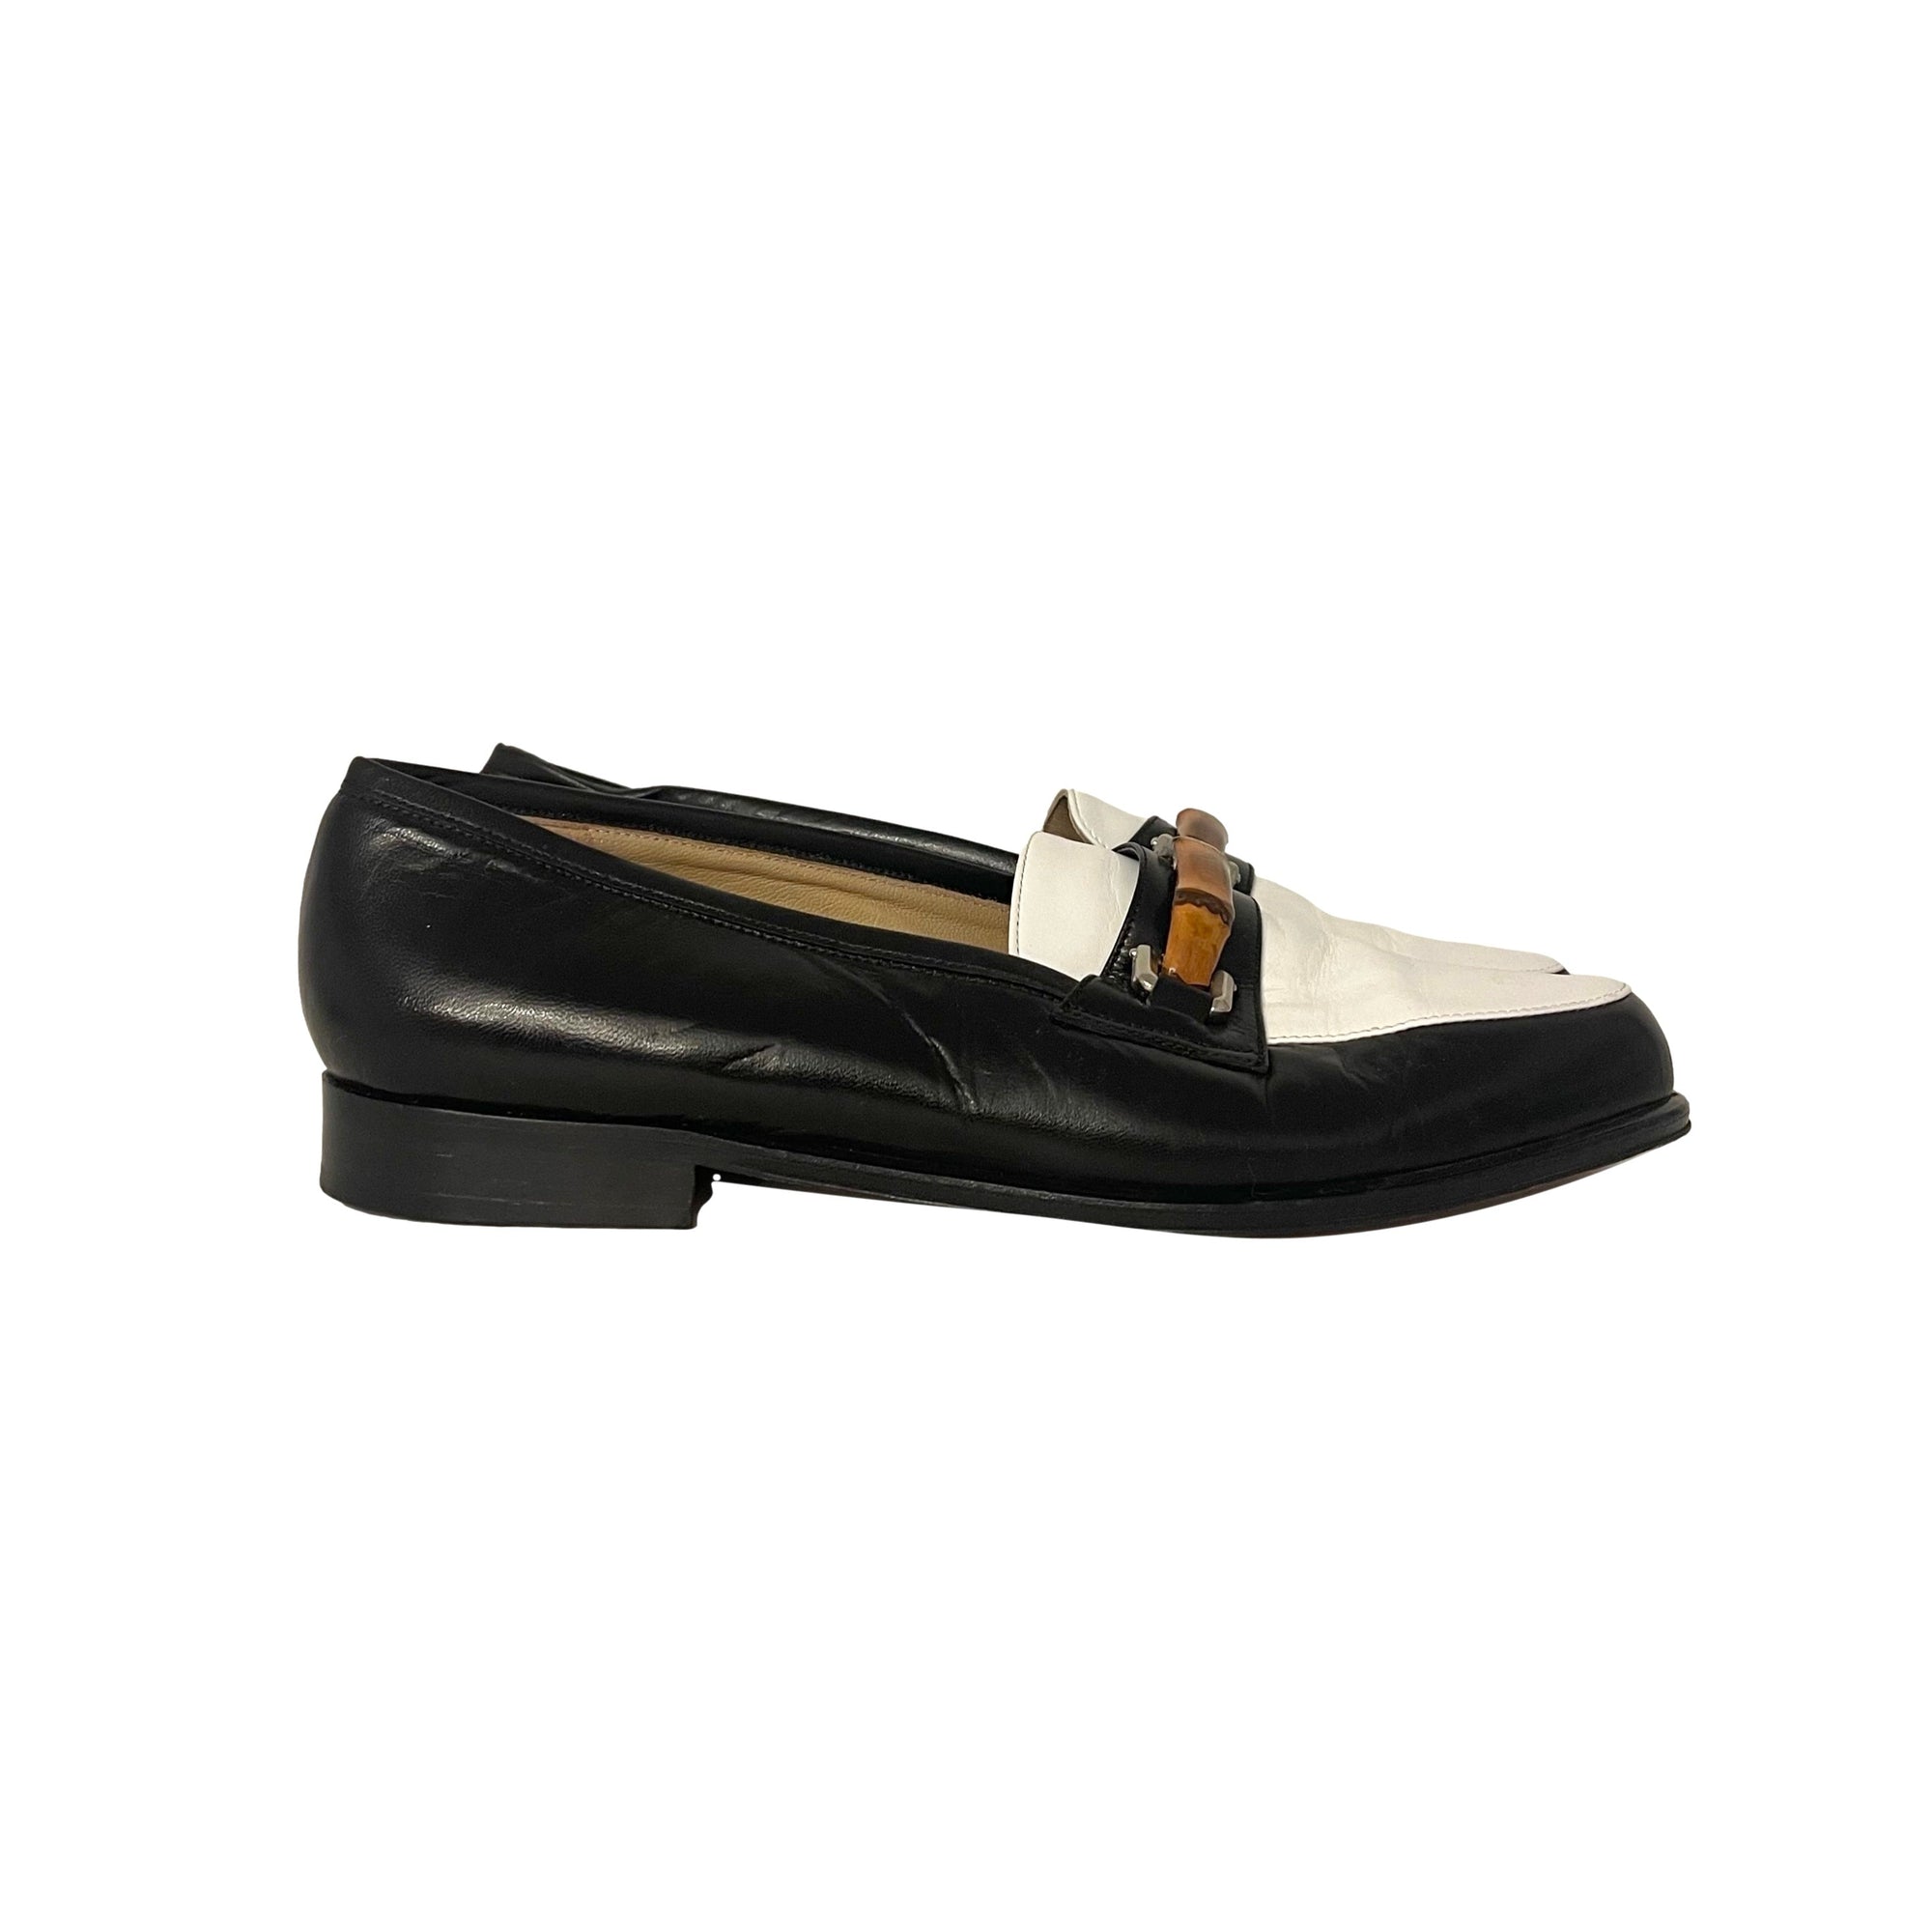 Gucci Bamboo Loafers - Shoes